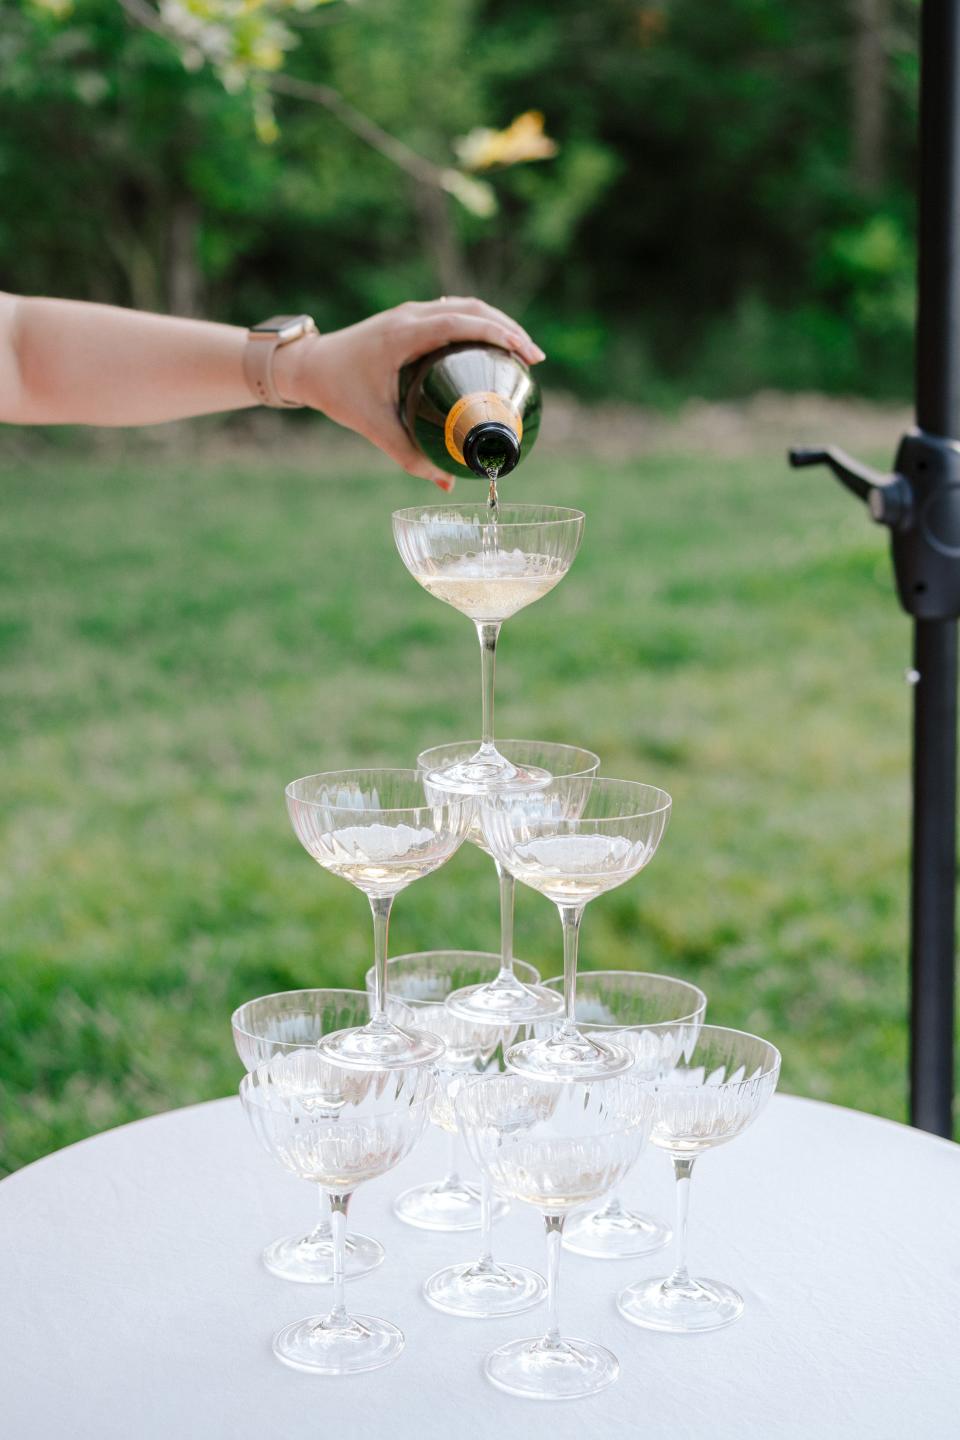 Steady hands for the Champagne tower pour.